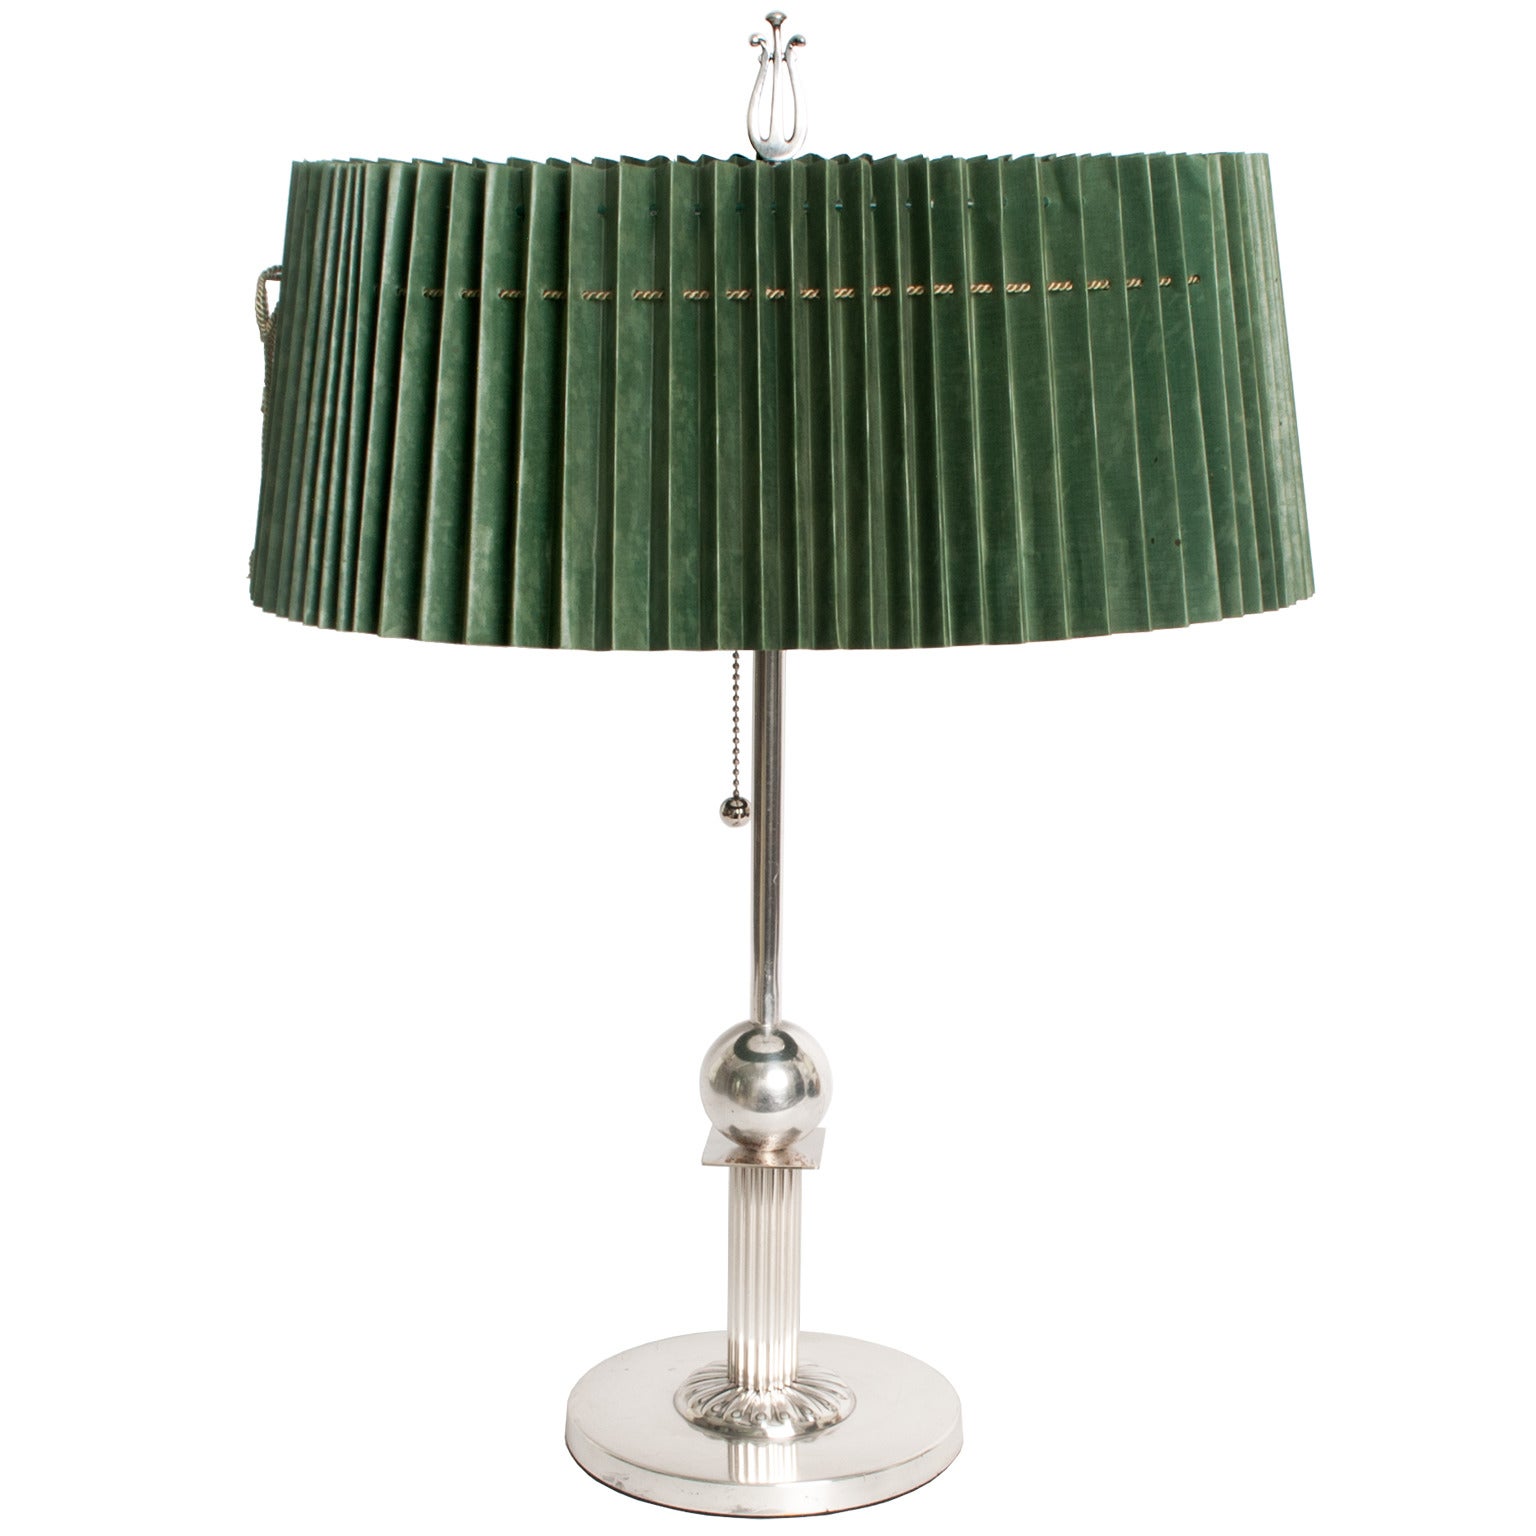 Swedish Art Deco Silver Plated Lamp by Elis Bergh for C.G. Hallberg